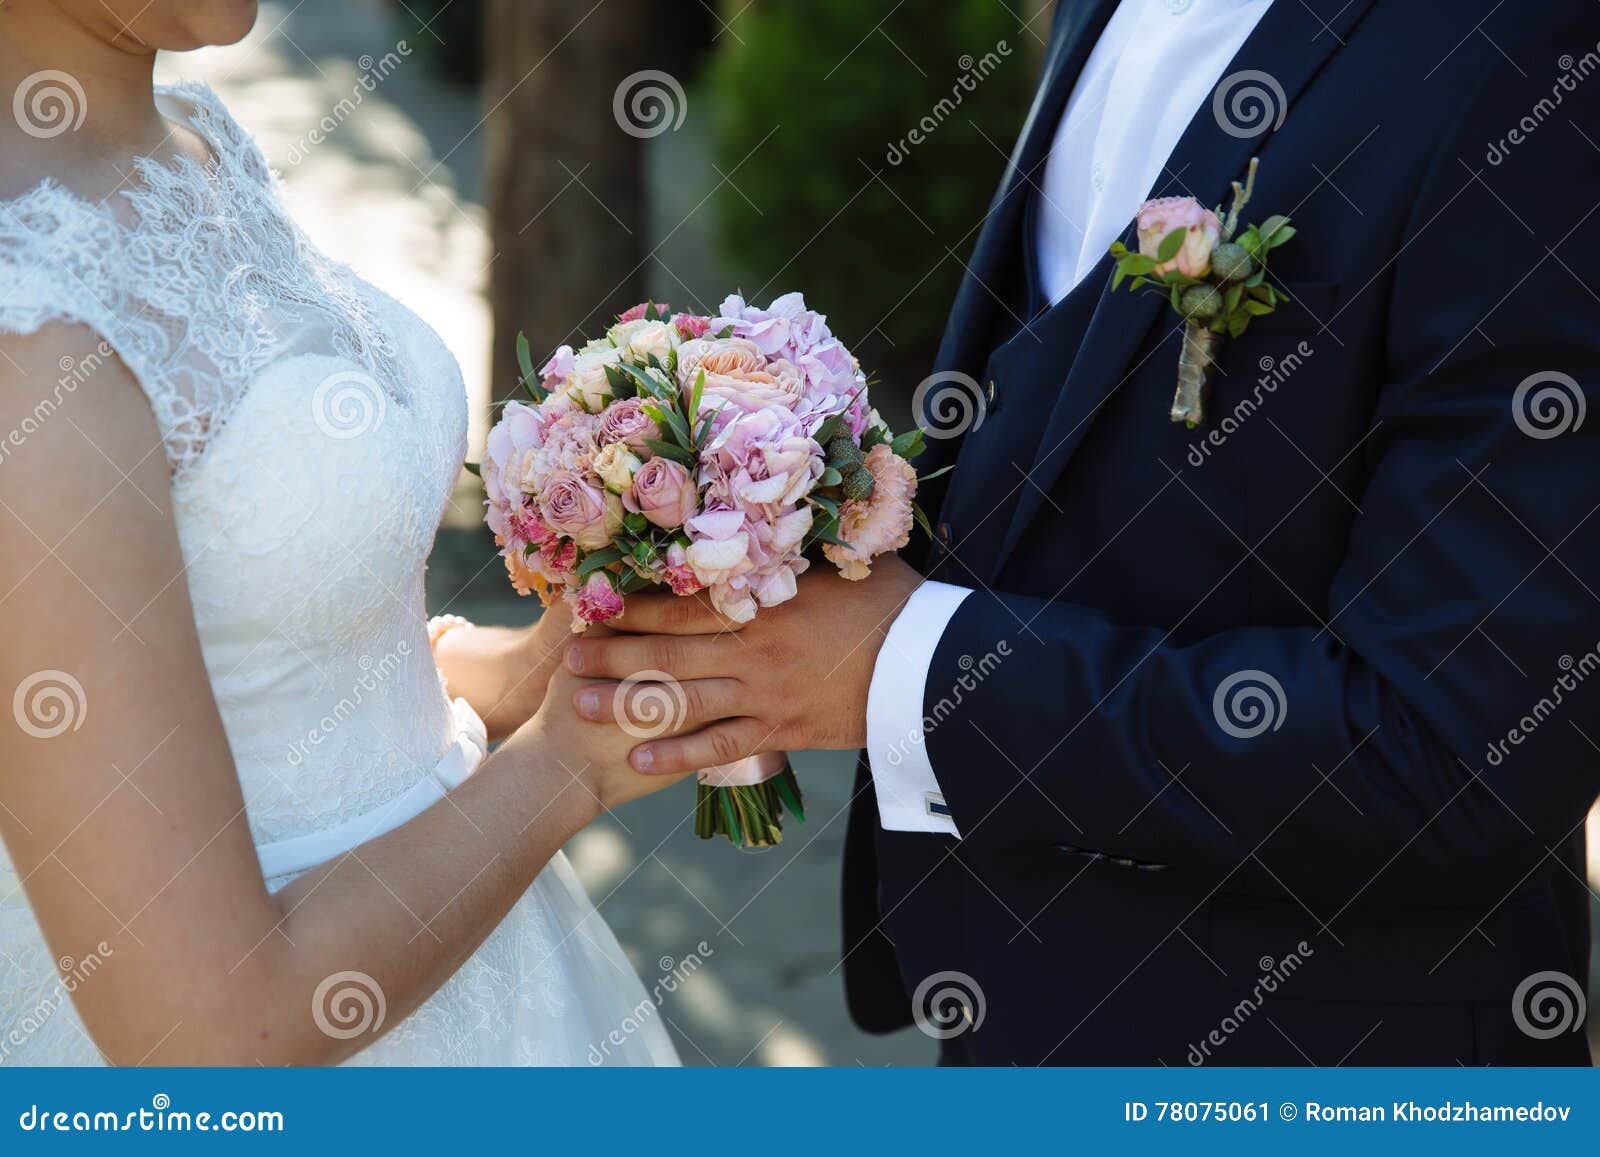 Wedding Bouquet in Marriage Couple Hands Stock Image - Image of bloom ...